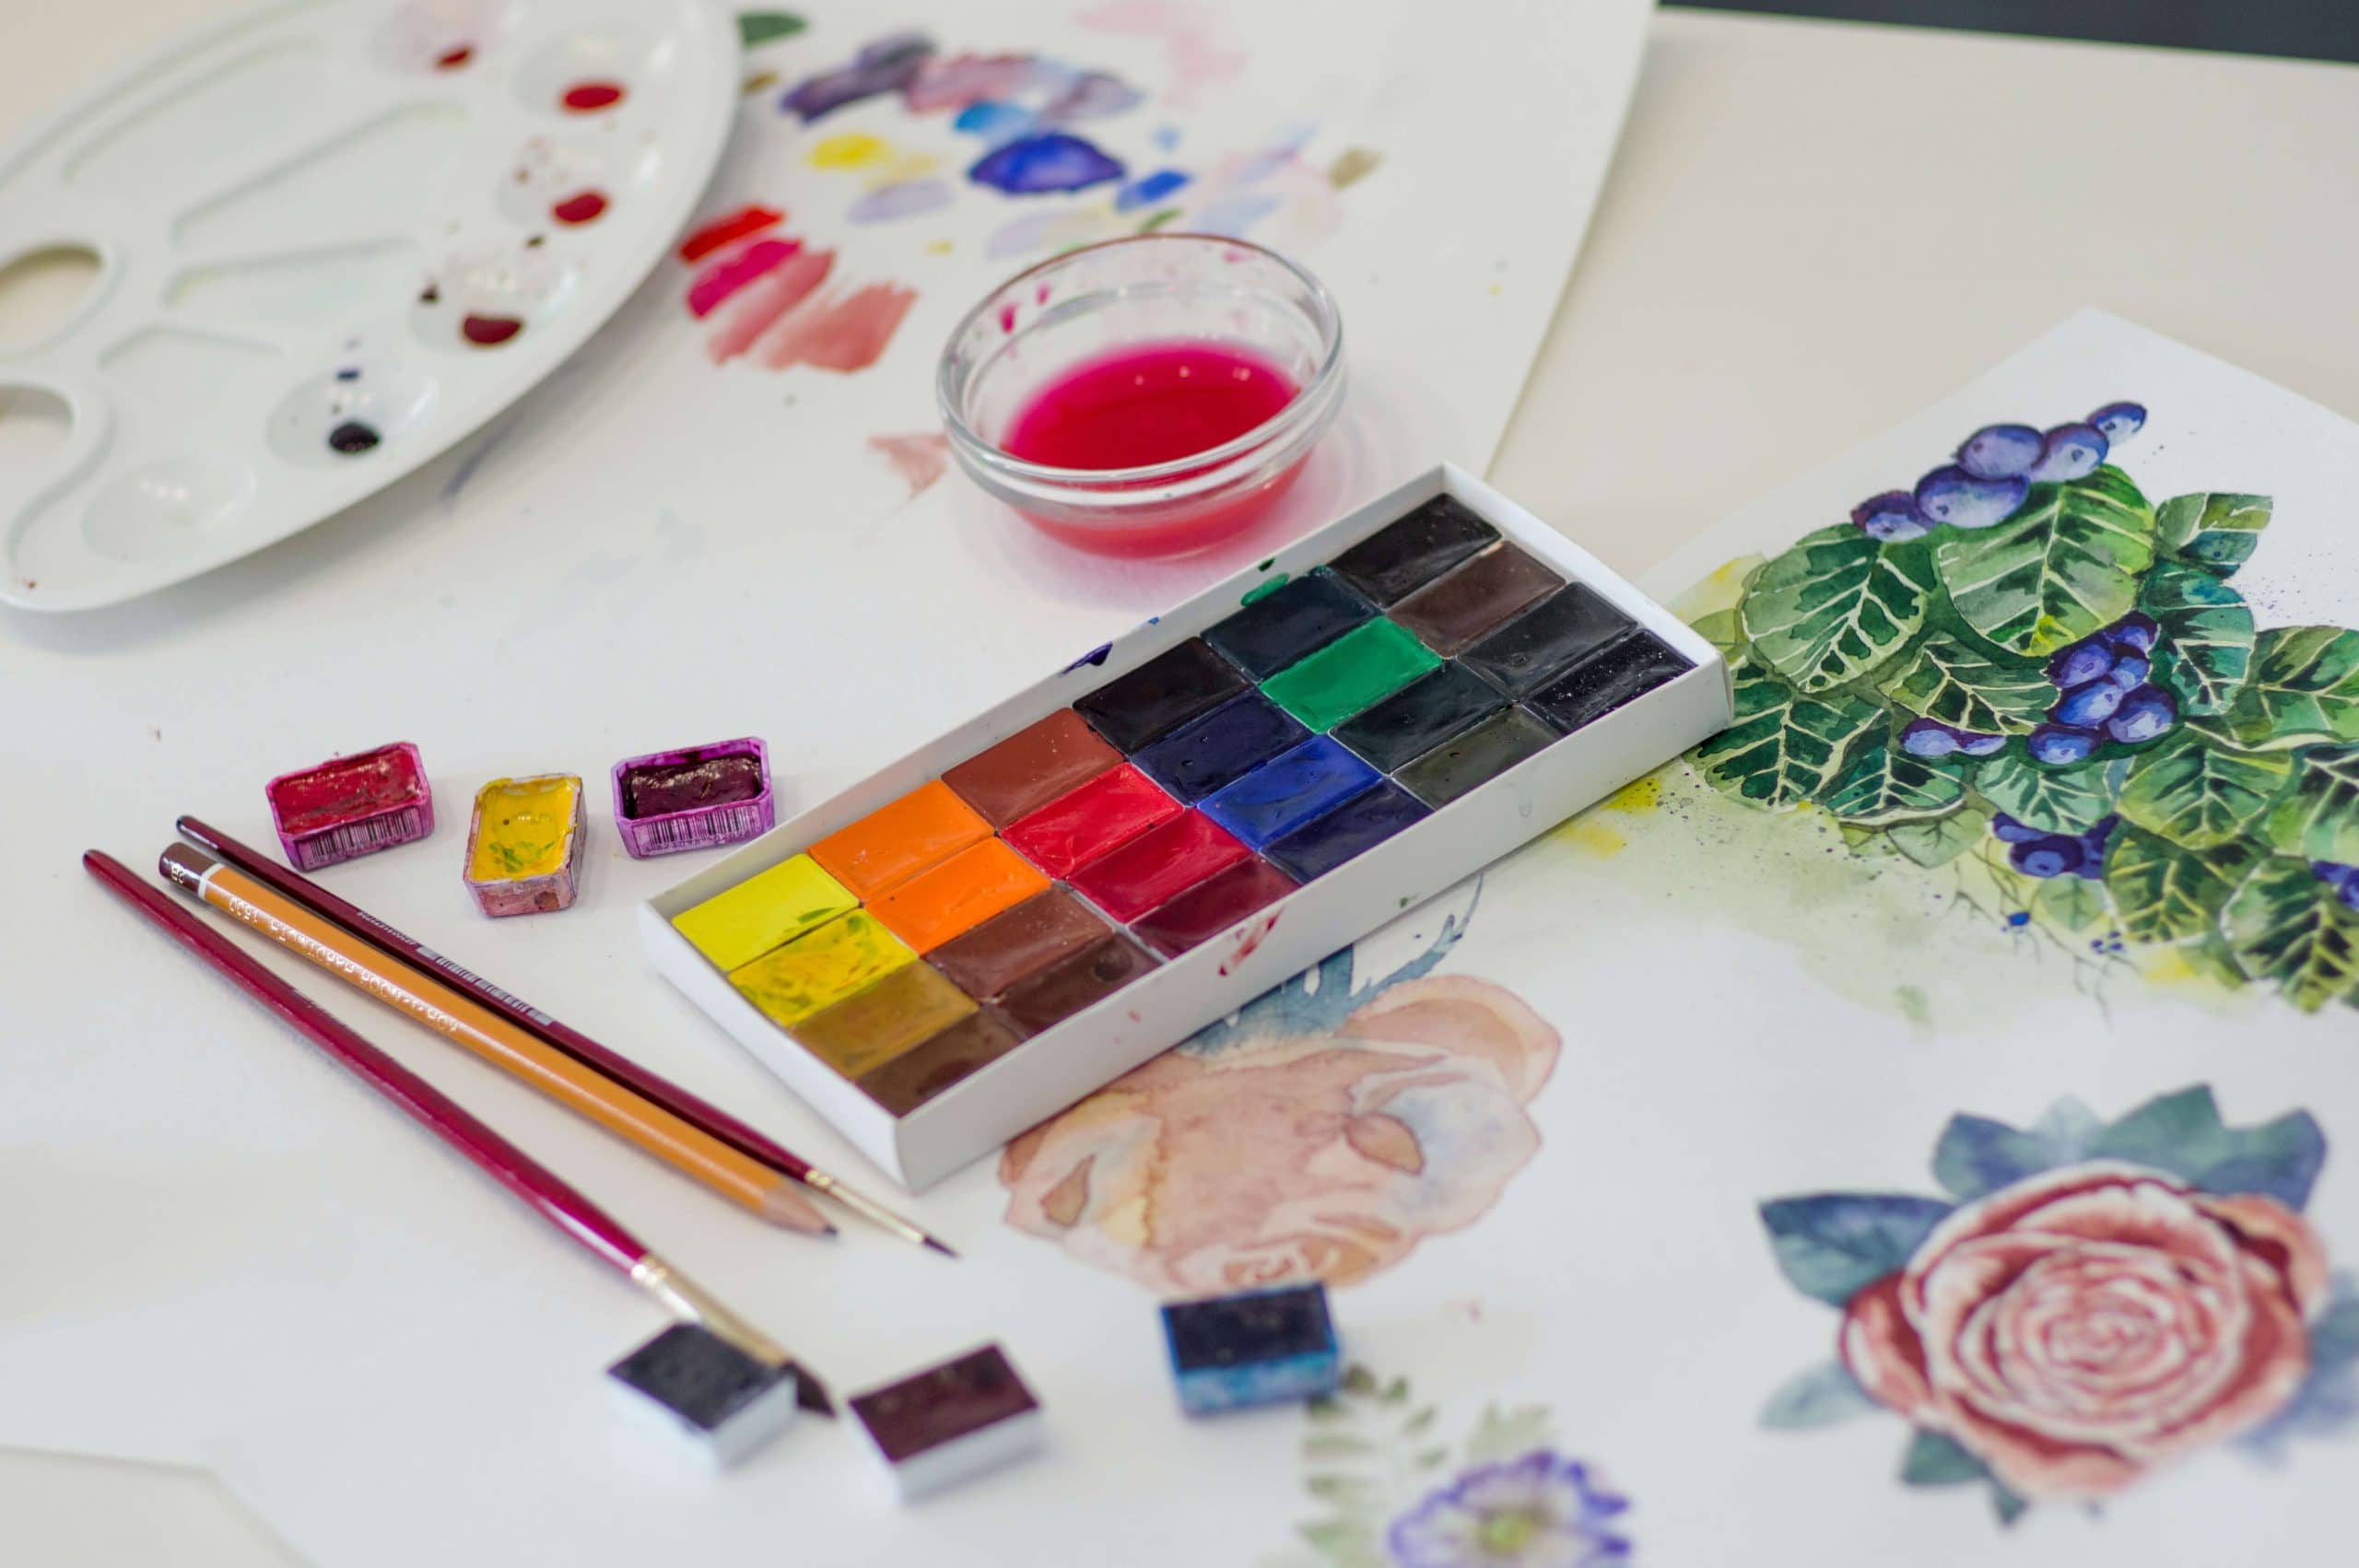 How do you begin your adventure with watercolors?